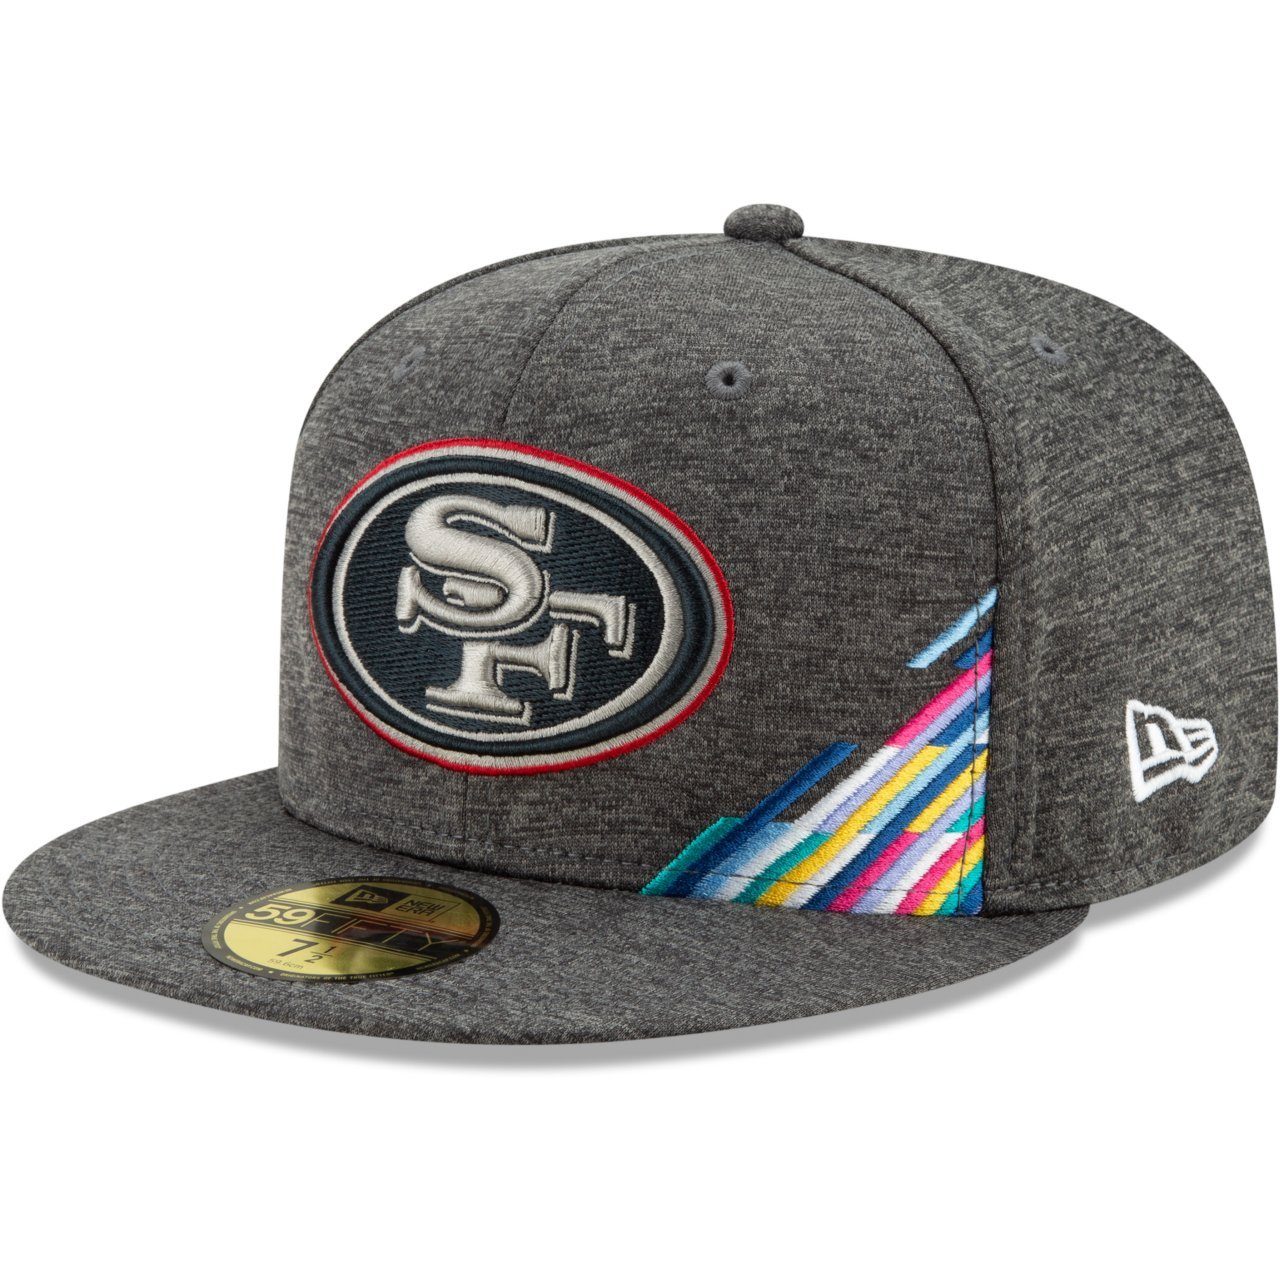 New Era Fitted Cap 59Fifty CRUCIAL CATCH NFL Teams San Francisco 49ers